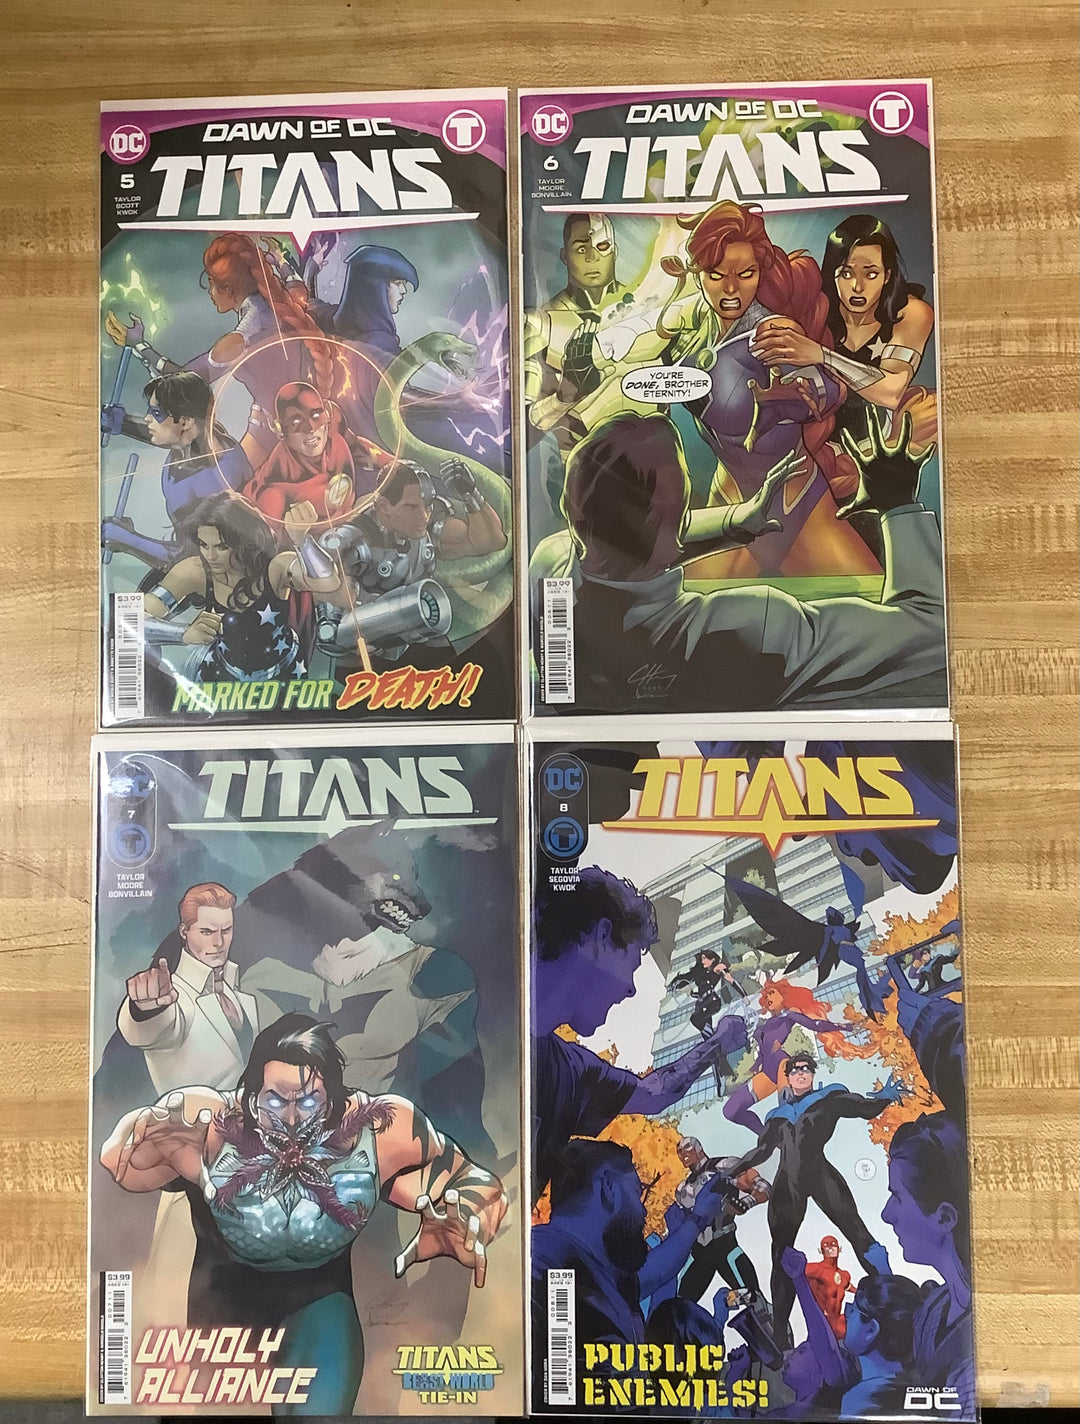 Lot of 22 Titans Beast World DC Comics - Complete Series Run with All Tie-Ins and One Shots!